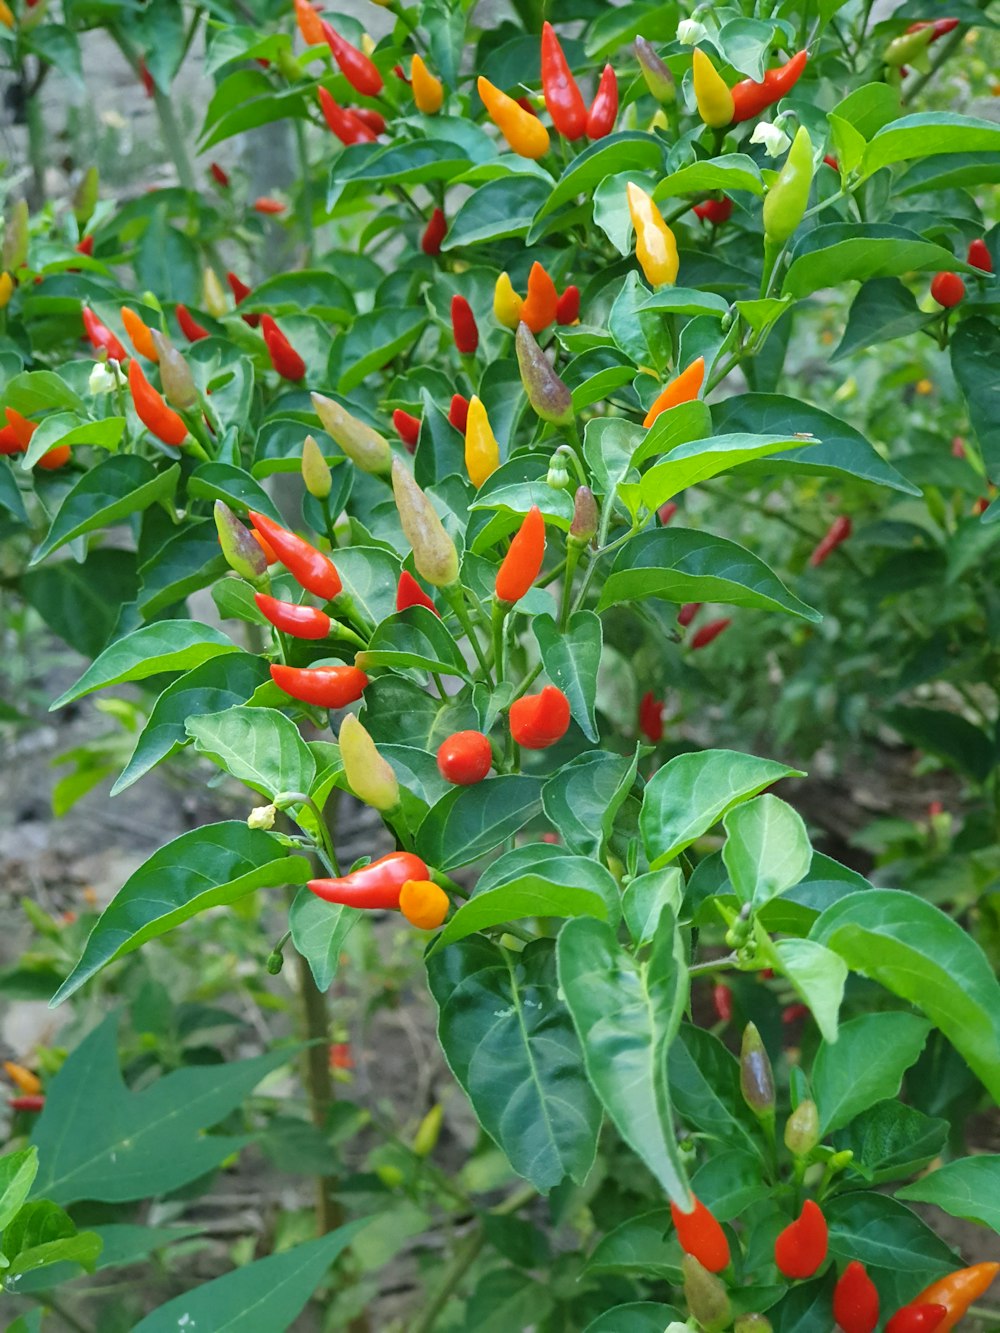 red chili pepers